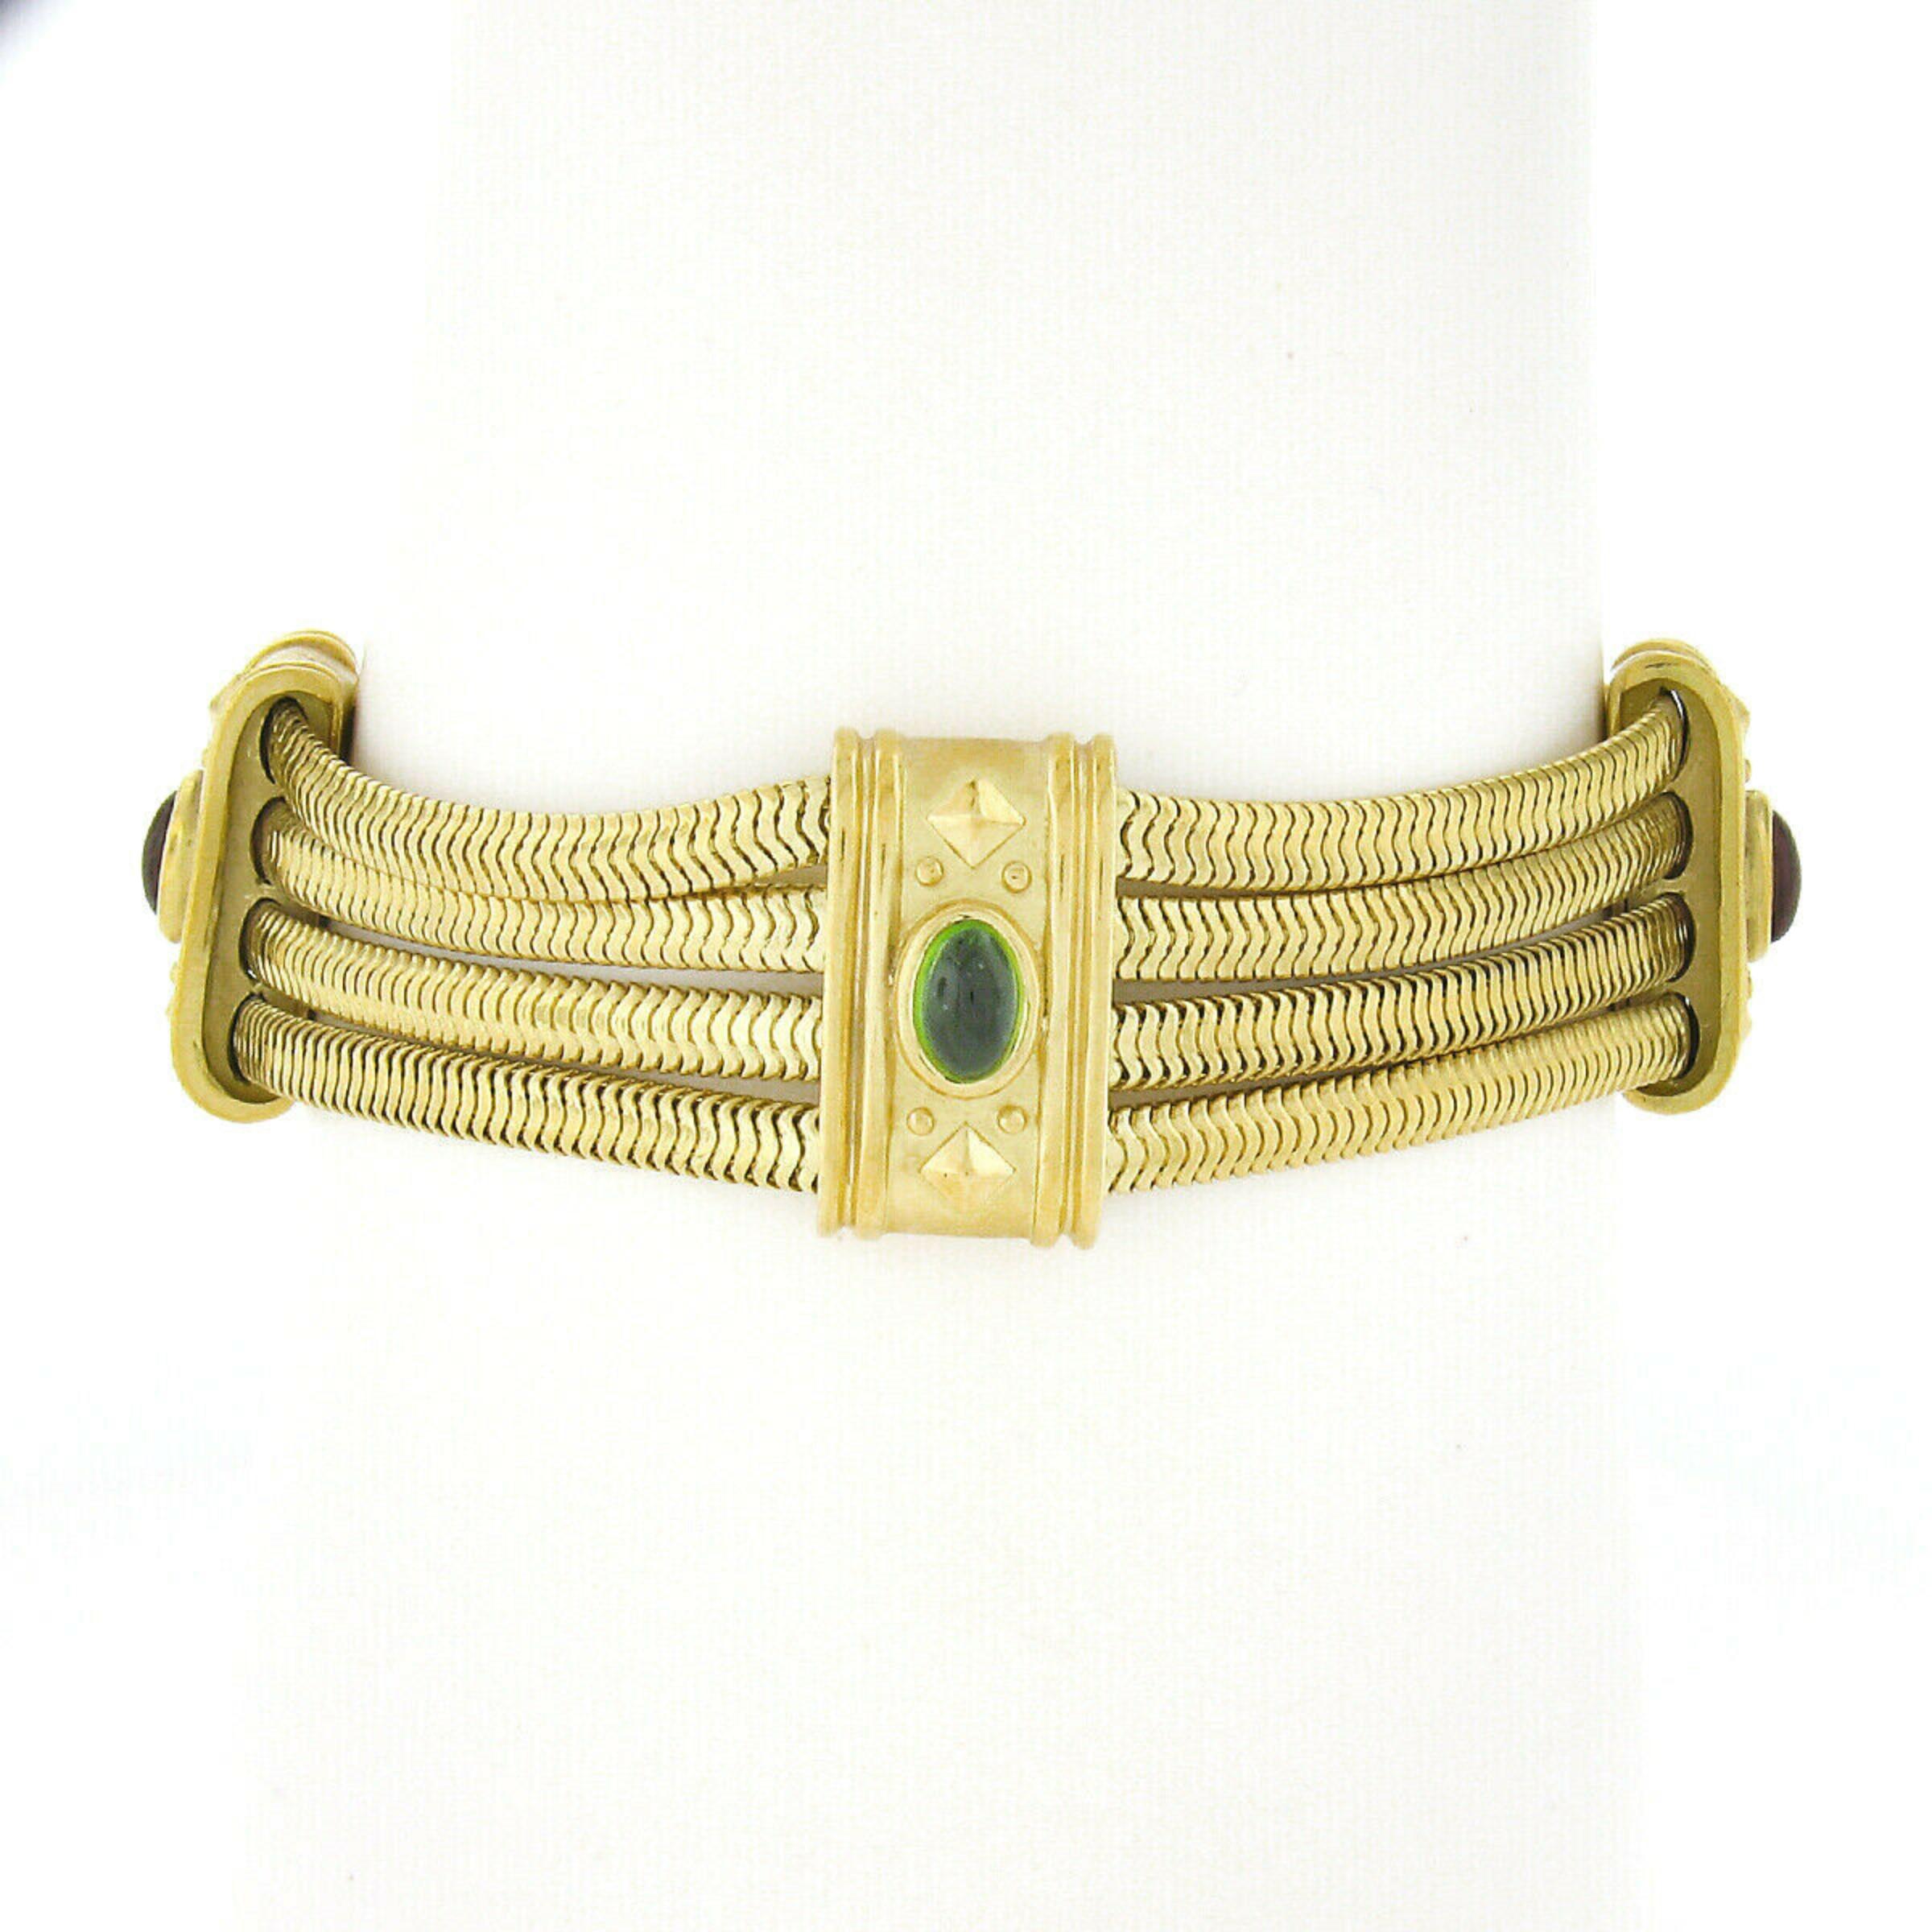 Here we have an elegant statement bracelet designed by SeidenGang that is very well crafted from solid 18k yellow gold. It features 4 rows of snake chain with 4 panels equally spaced throughout in which each are neatly bezel set with a fine